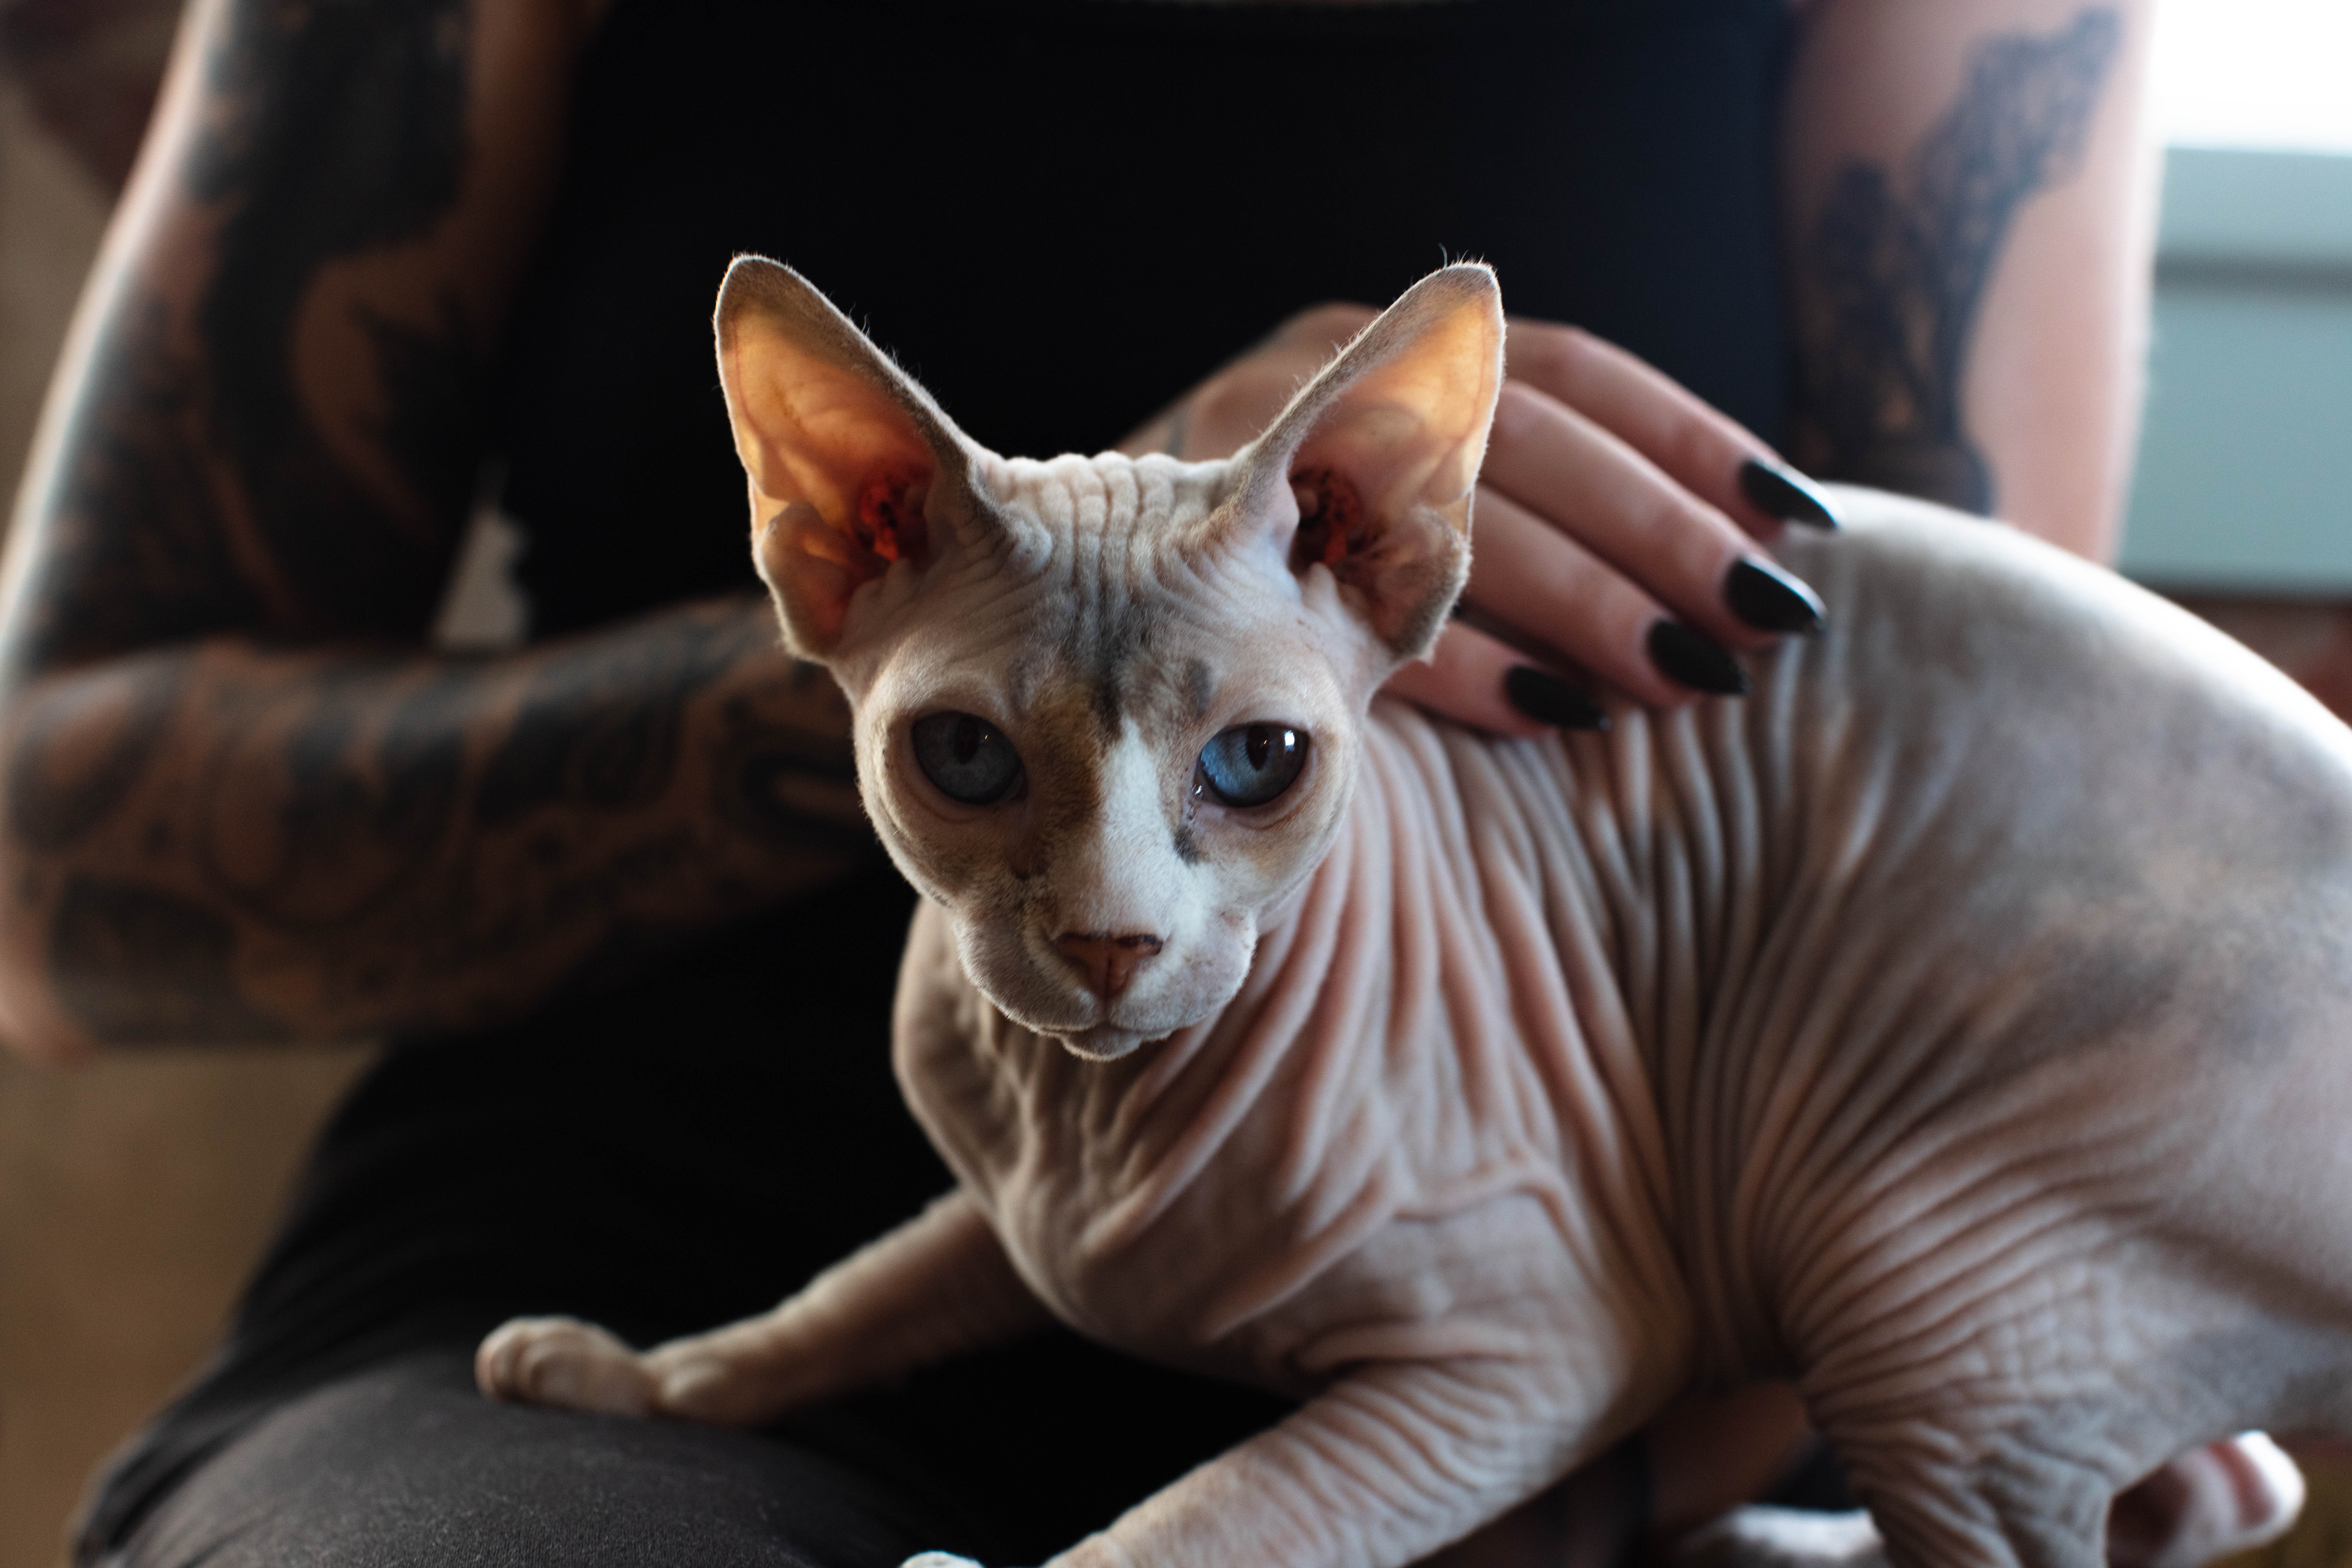 Sphynx cat sitting on a person's lap